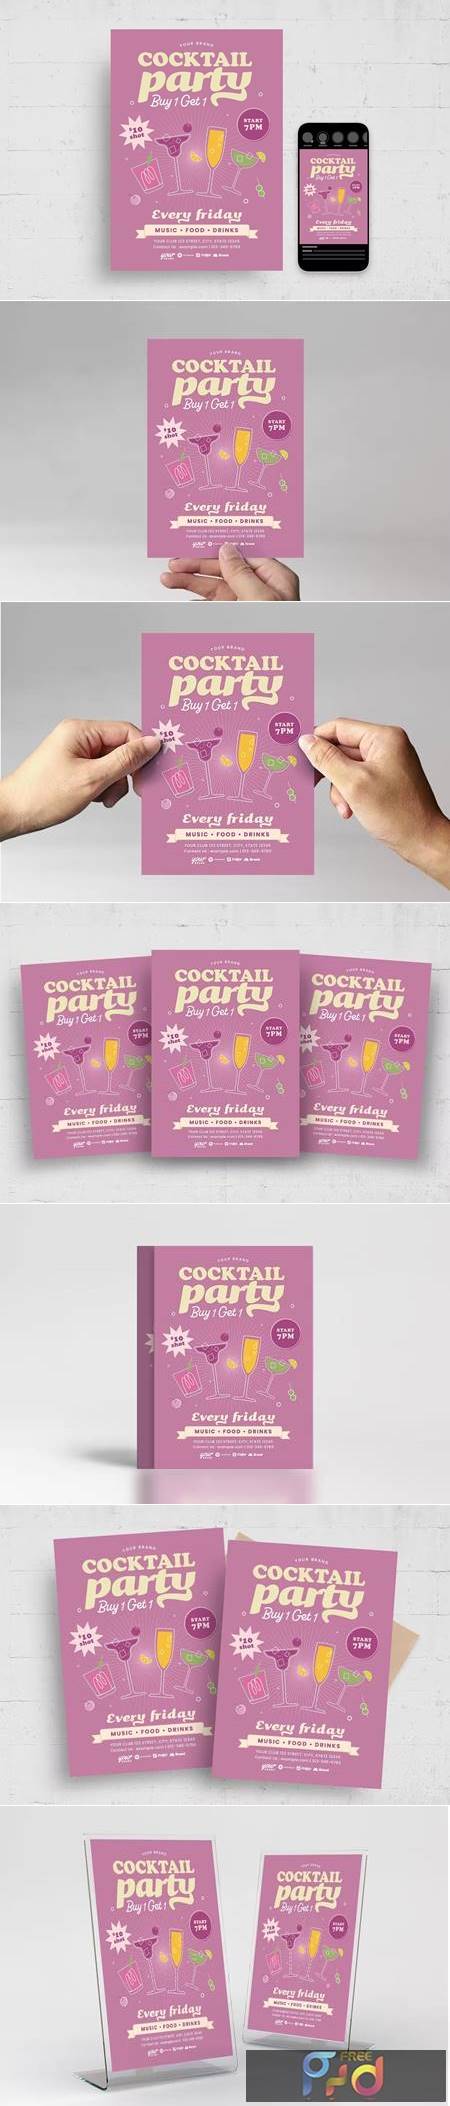 Retro Cocktail Party Flyer Template N4H9K8E 1